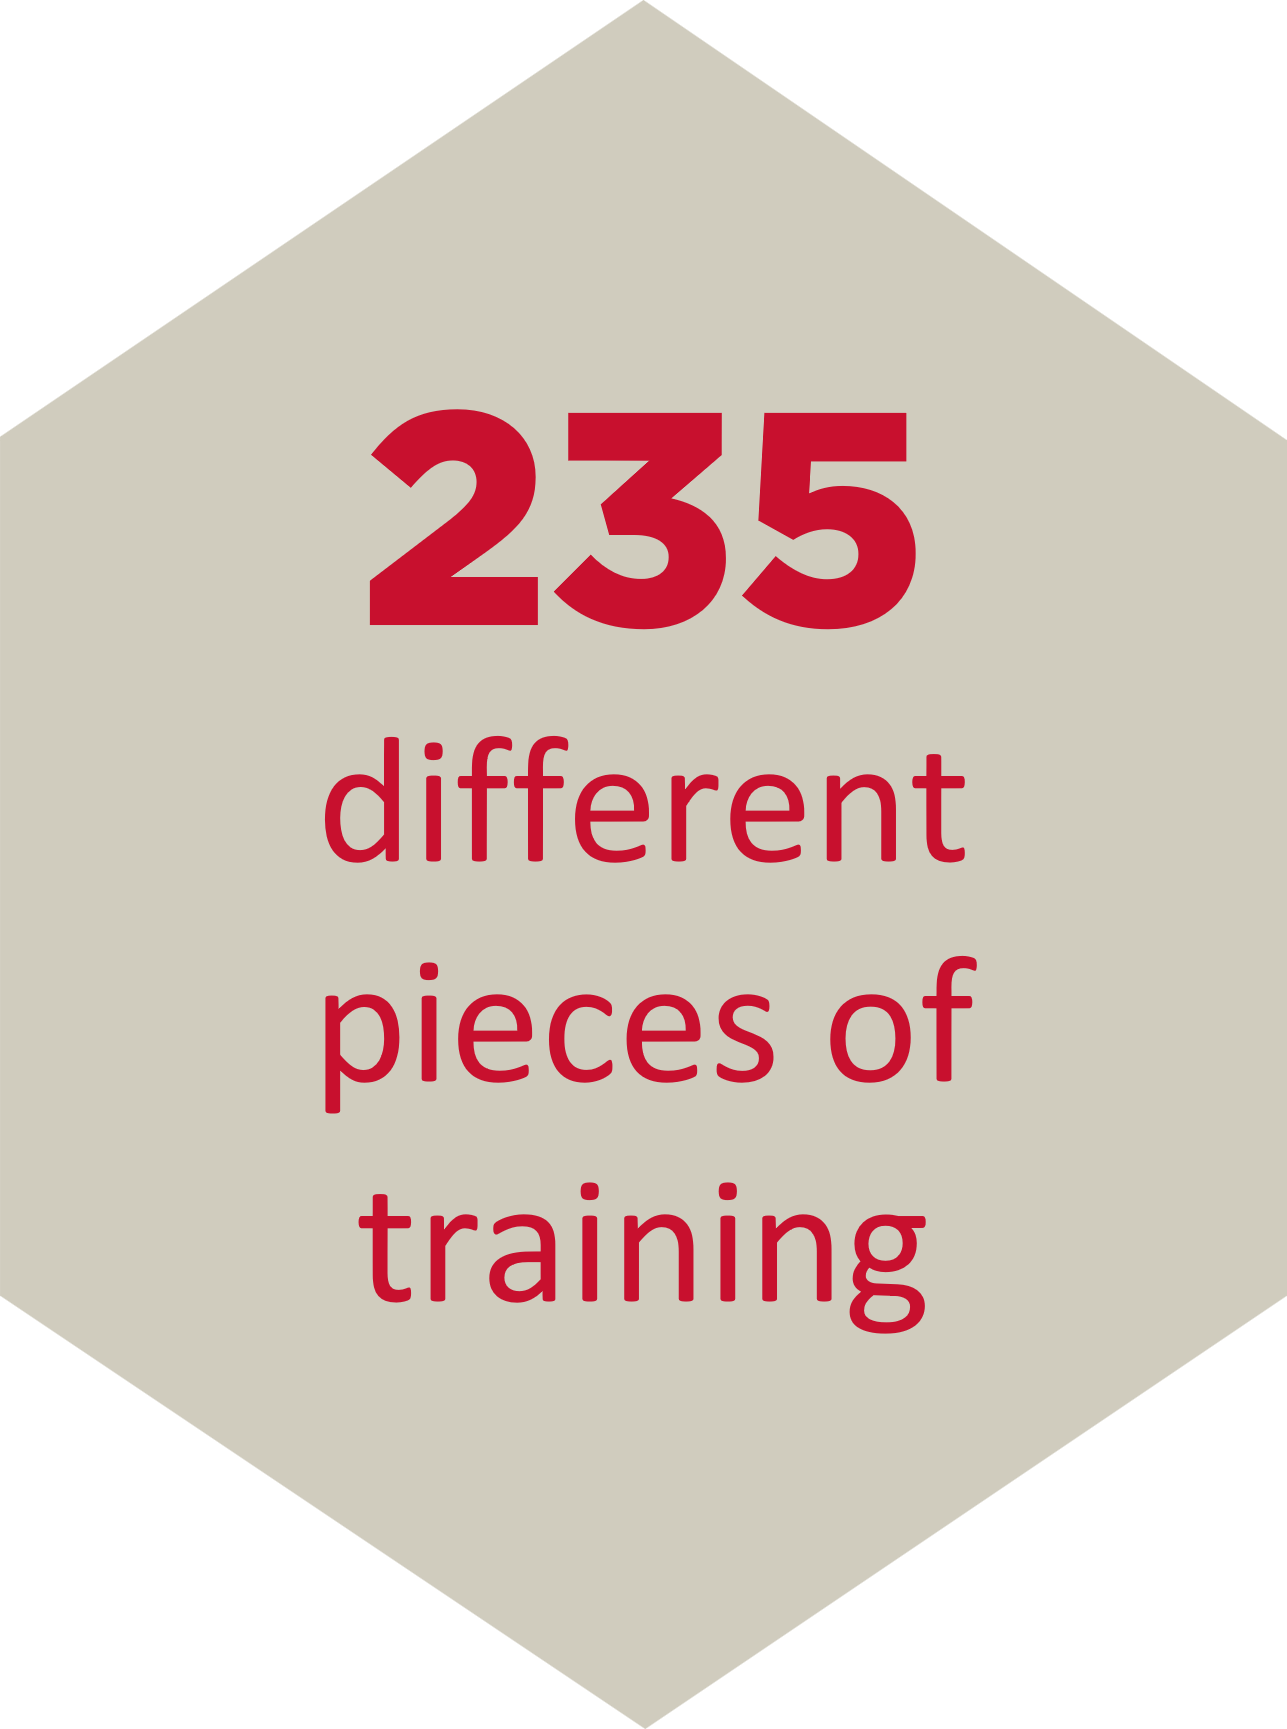 A light grey hexagon with red text within it saying '235 different pieces of training'